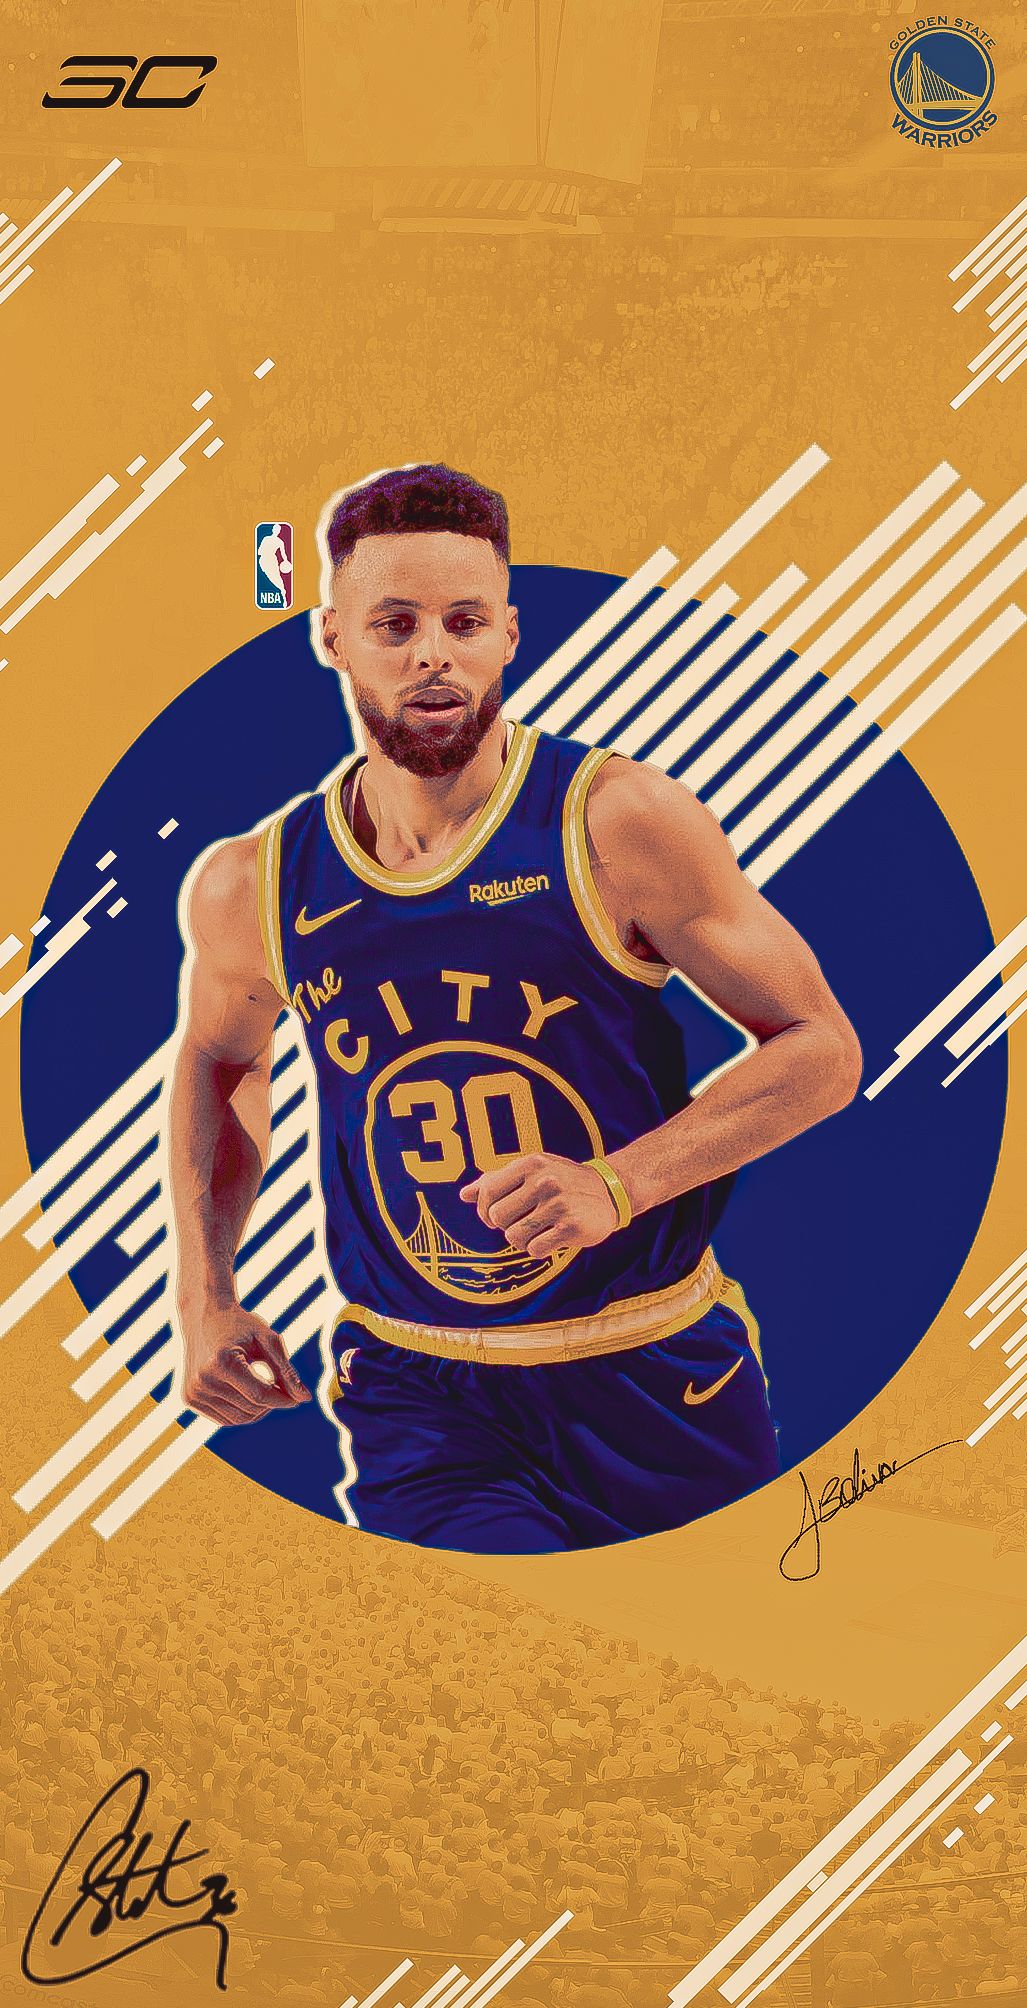 Steph Curry Home Screen Wallpaper Discover more background Basketball  cool home screen iphone wallpap  Stephen curry Stephen curry wallpaper  Curry wallpaper